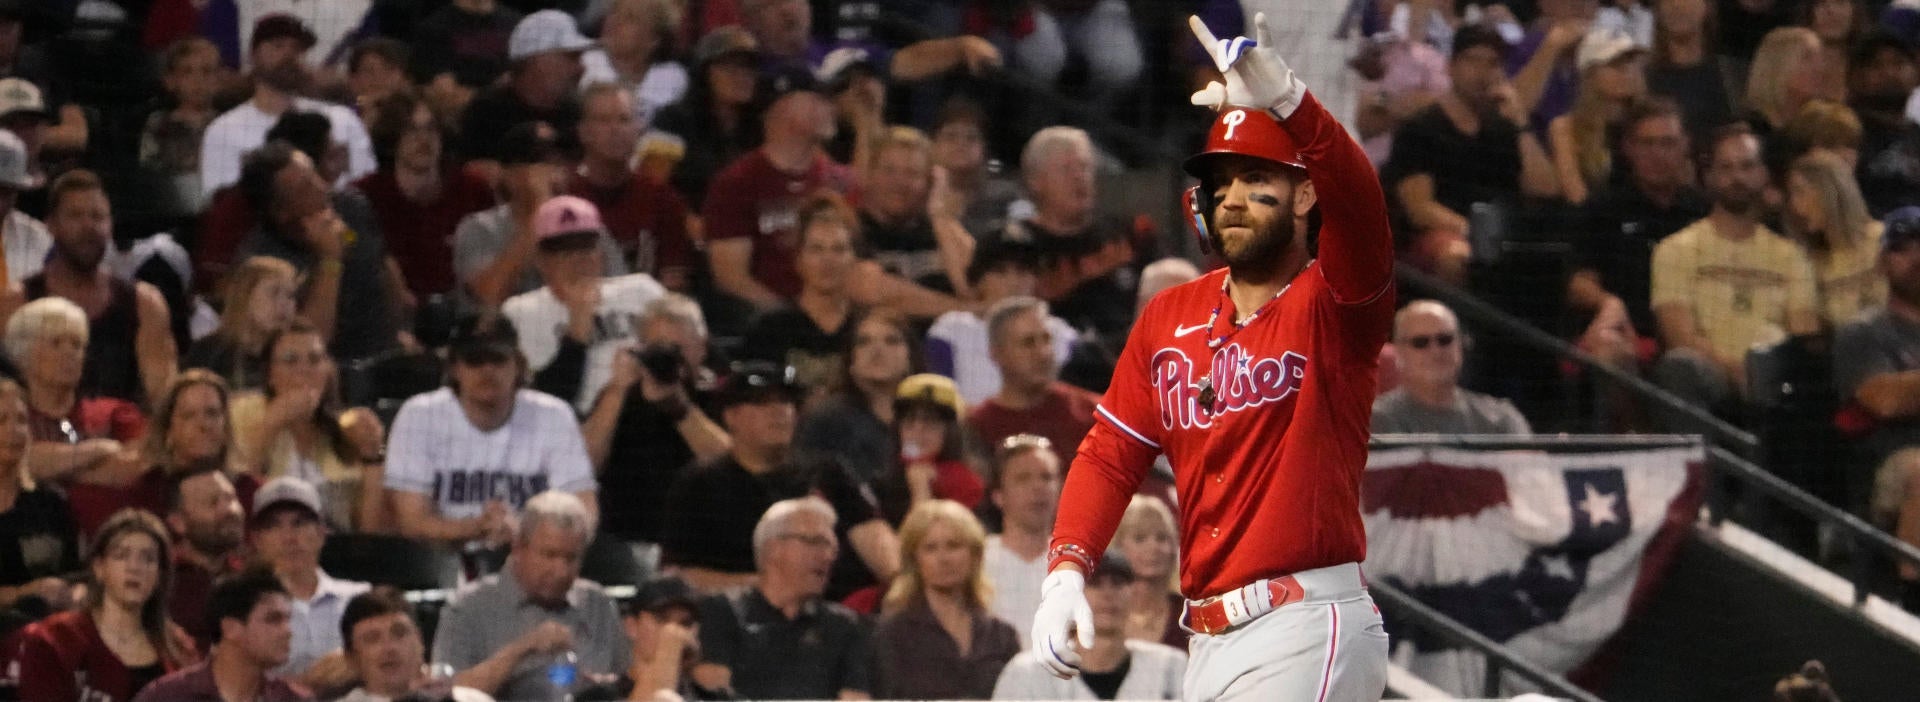 Diamondbacks vs. Phillies Tuesday NLCS Game 7 odds, props: Bettors mixed on Philadelphia's first-ever Game 7, expecting Bryce Harper homer